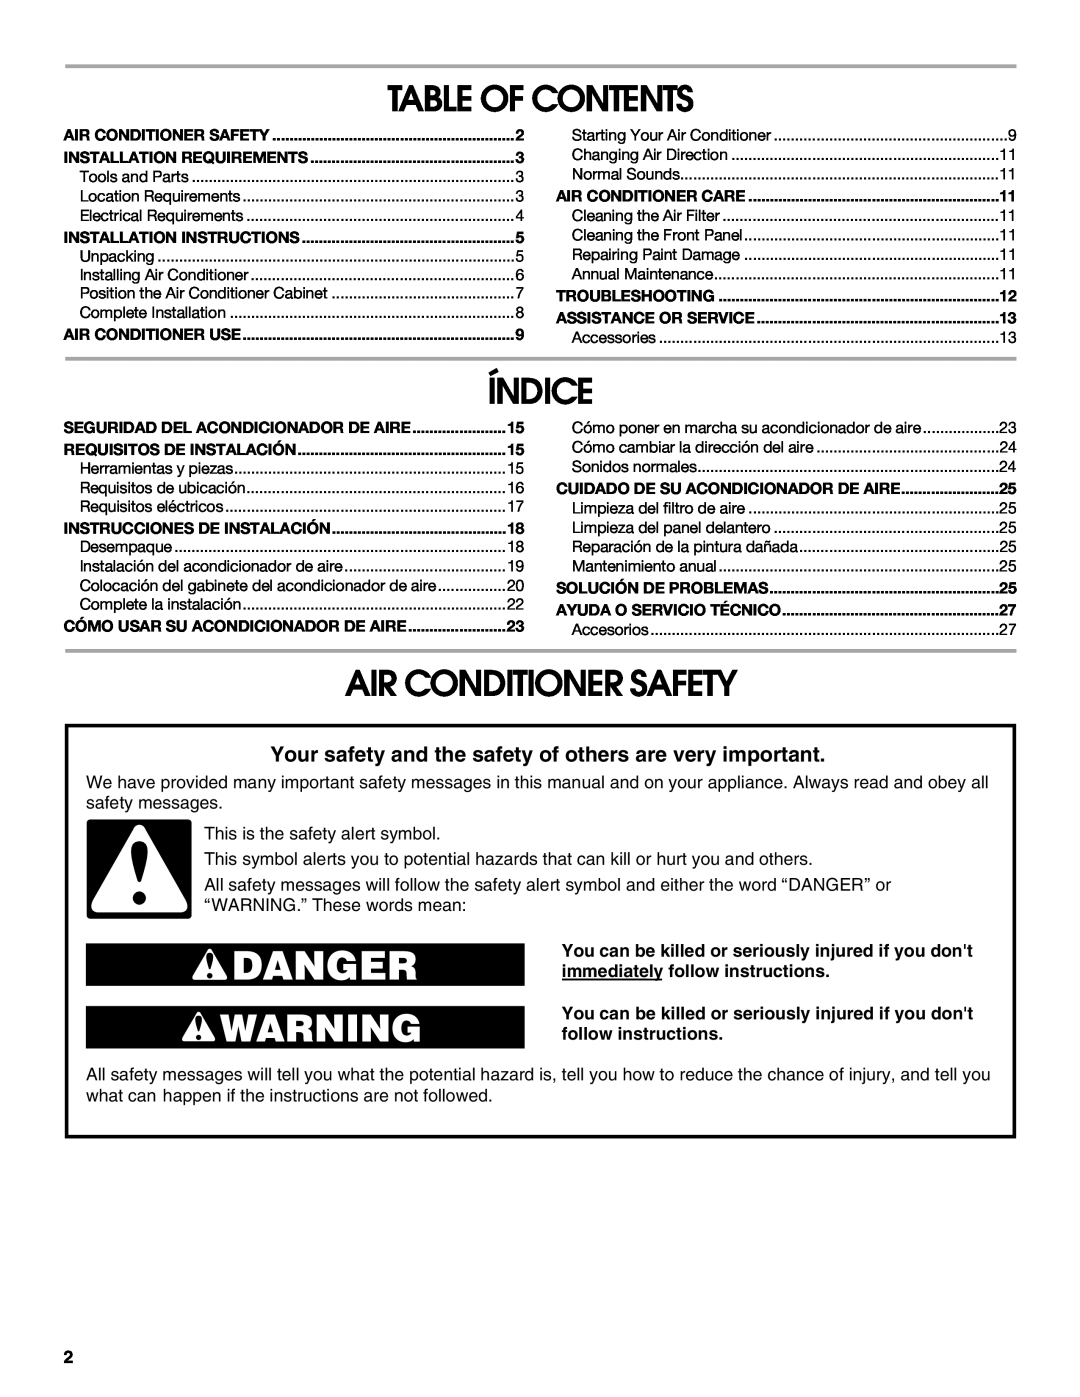 Whirlpool ACE082XR0 manual Table Of Contents, Índice, Air Conditioner Safety 